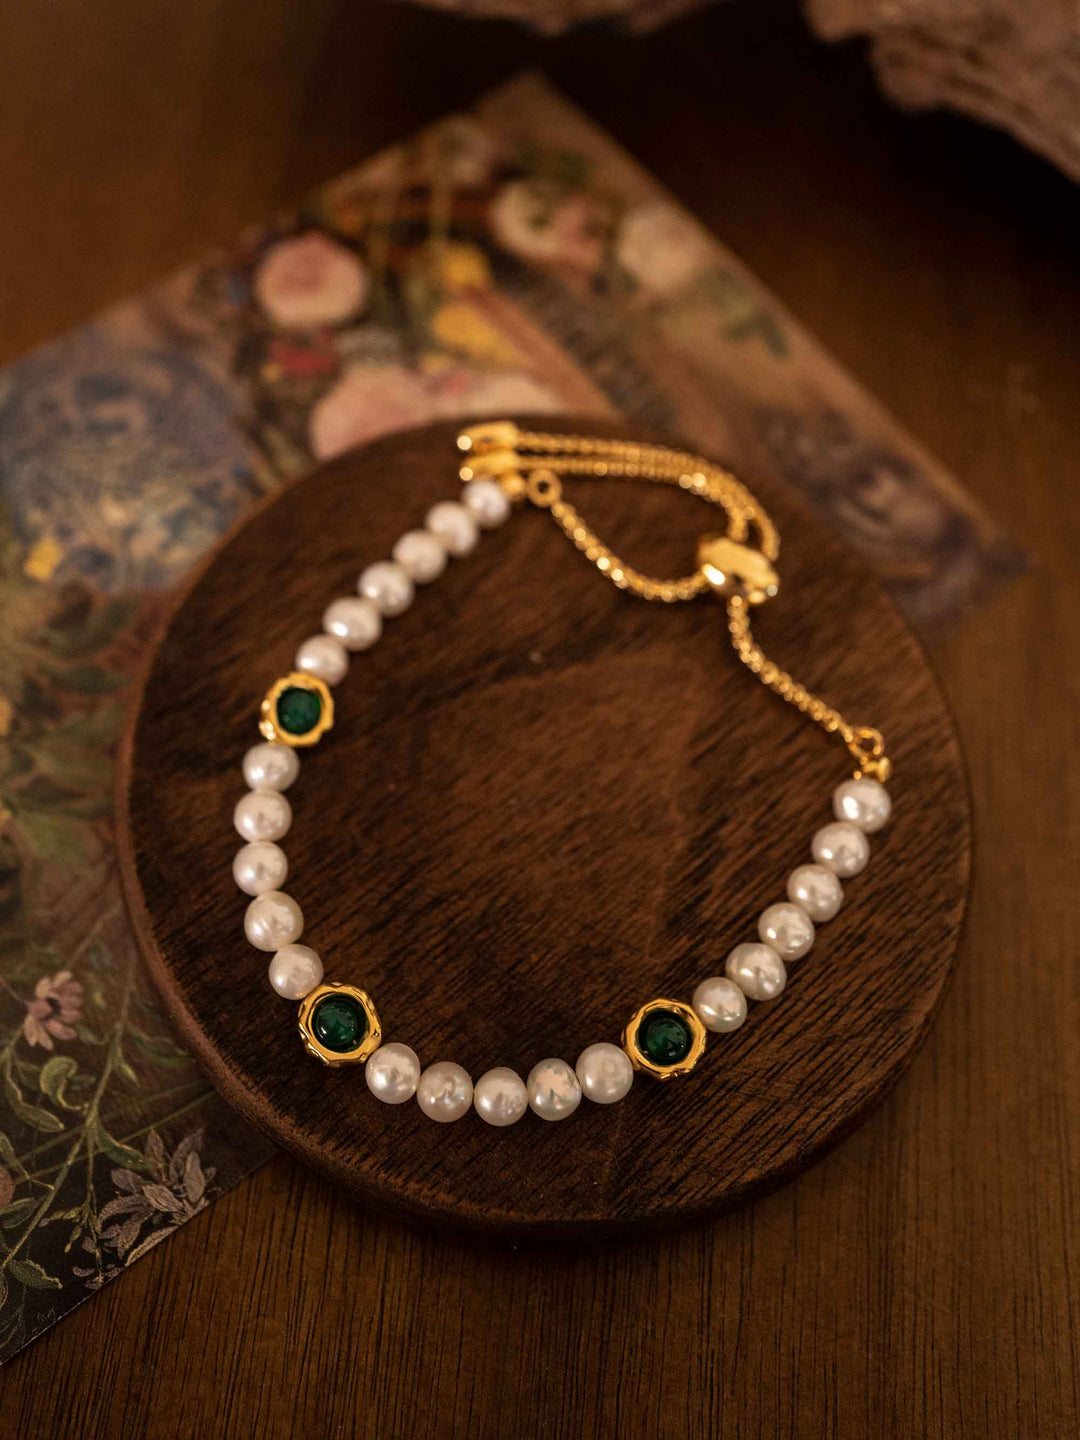 A bracelet of green stones and cultured pearls with gold